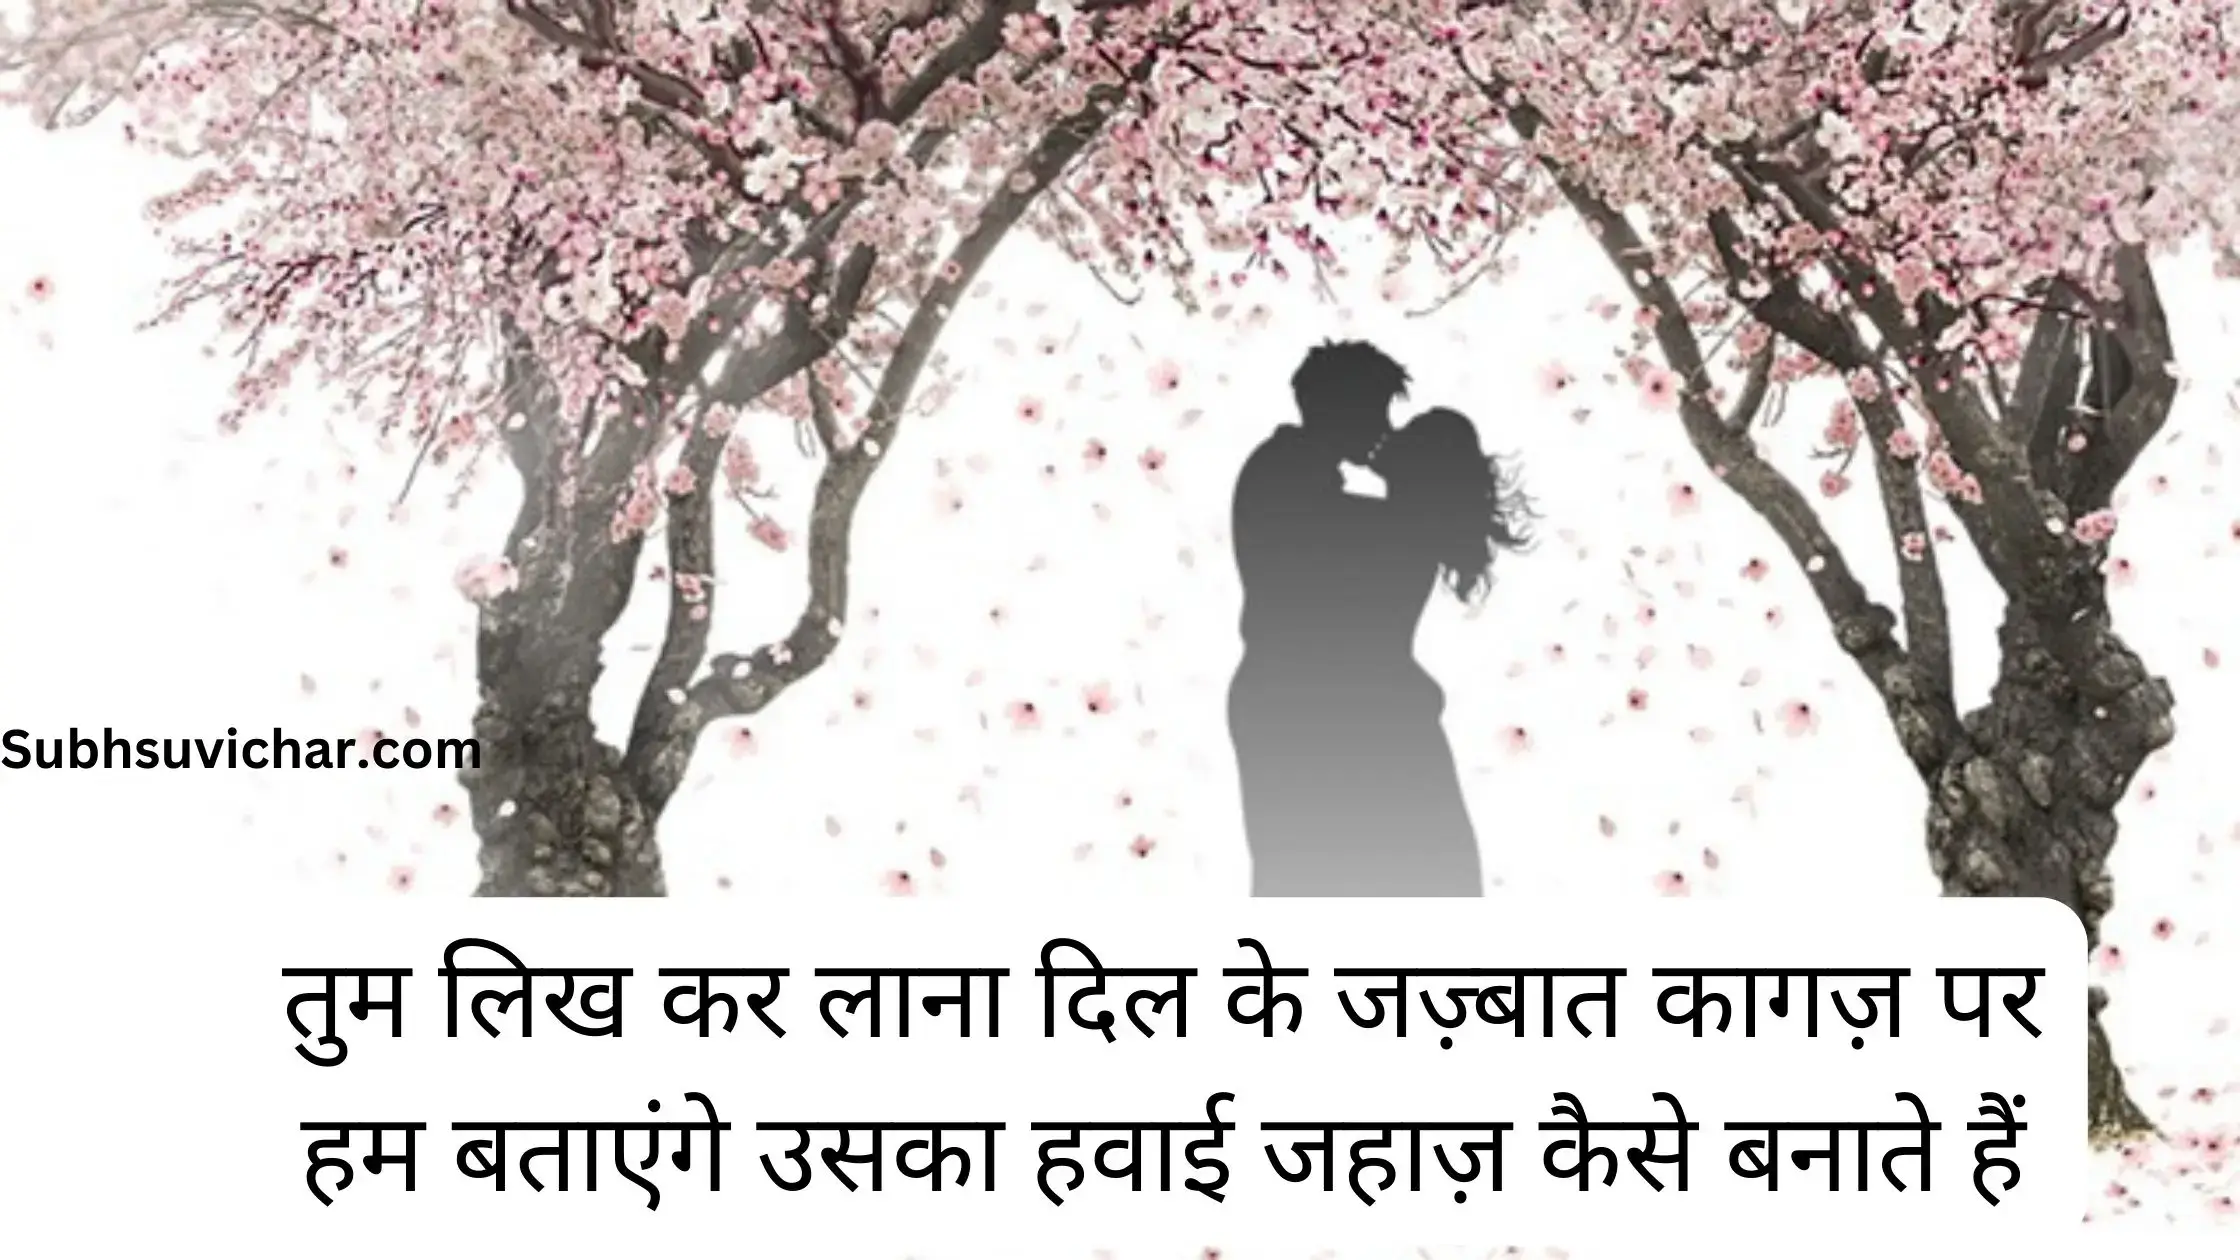 This post contains emotional heart touching shayari in hindi font with images for your whatsapp and facebook status.